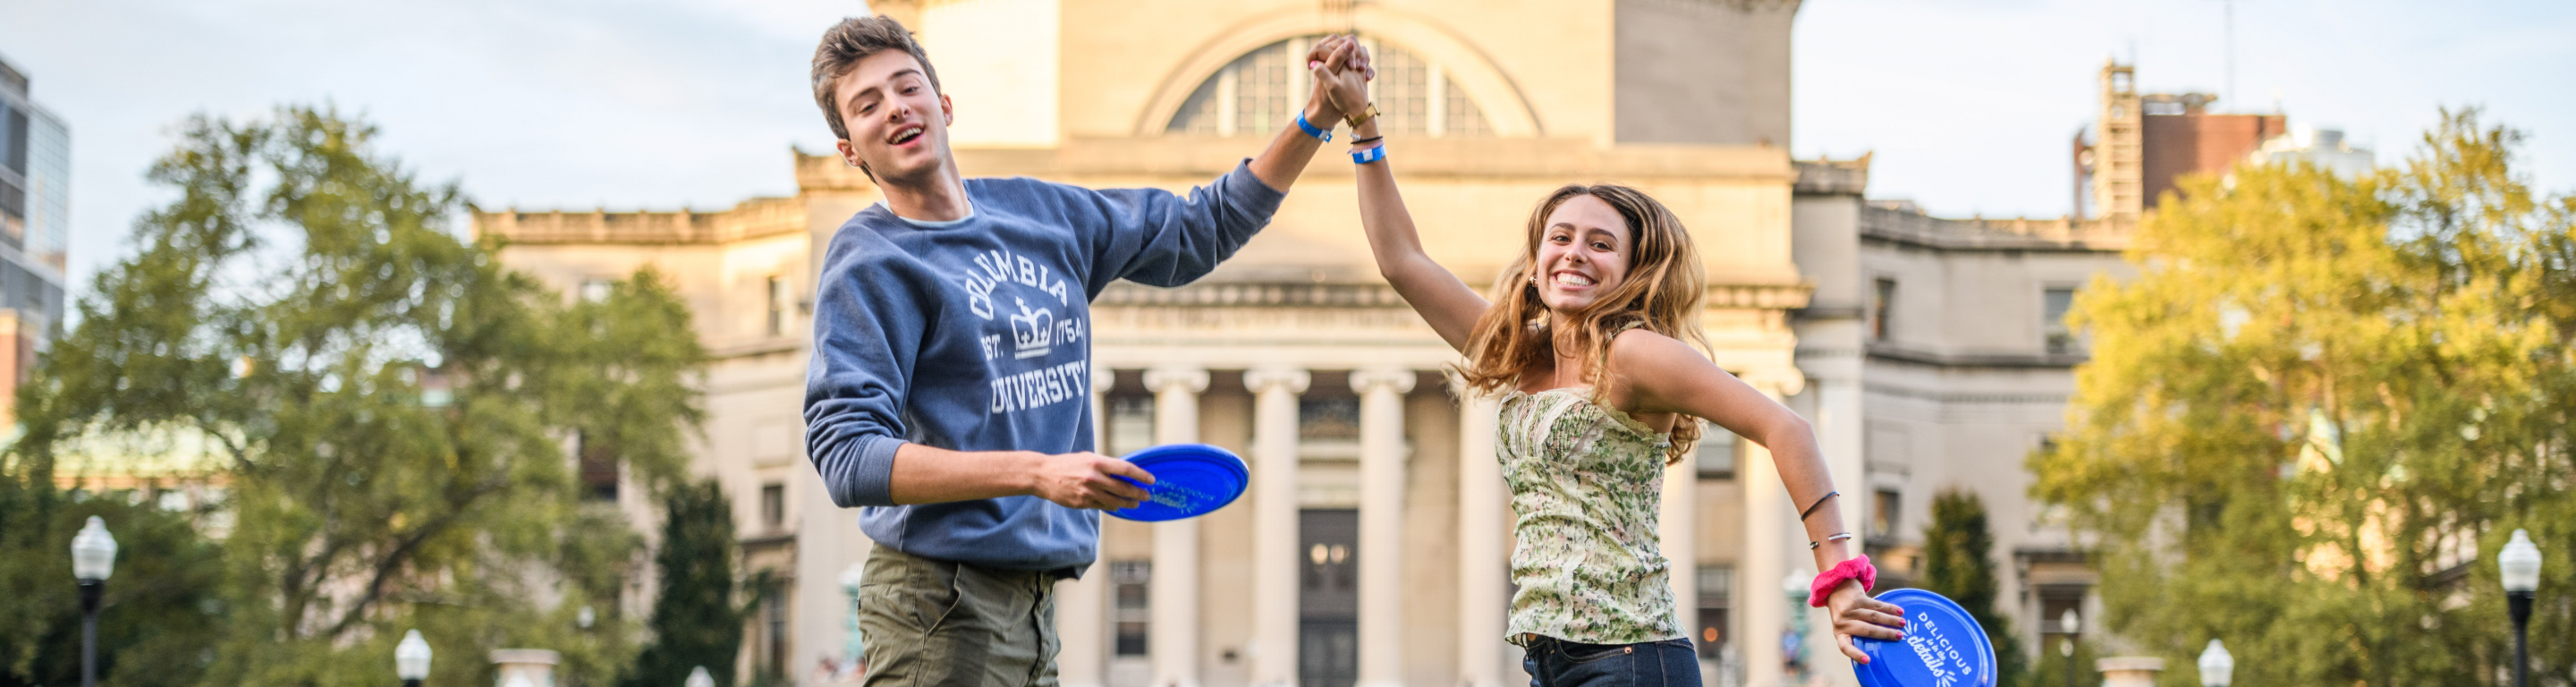 Students hold hands and frisbees on South Lawn in front of Low Library